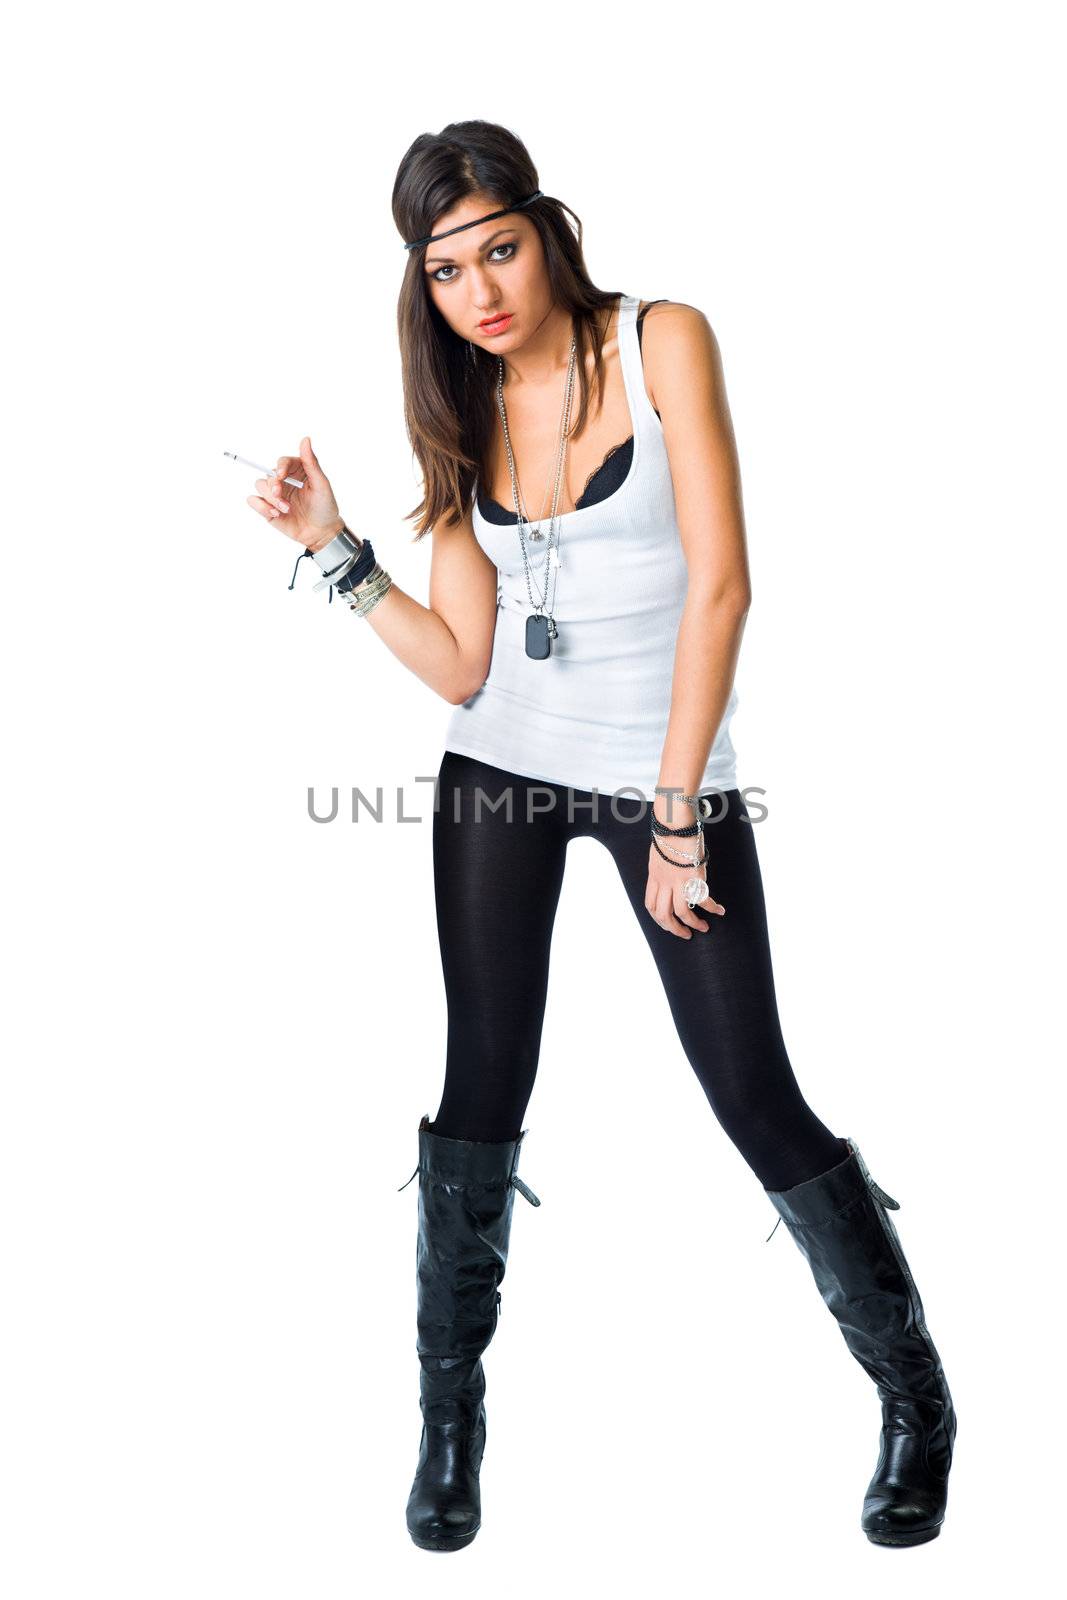 provocative female standing and holding cigarette on white background